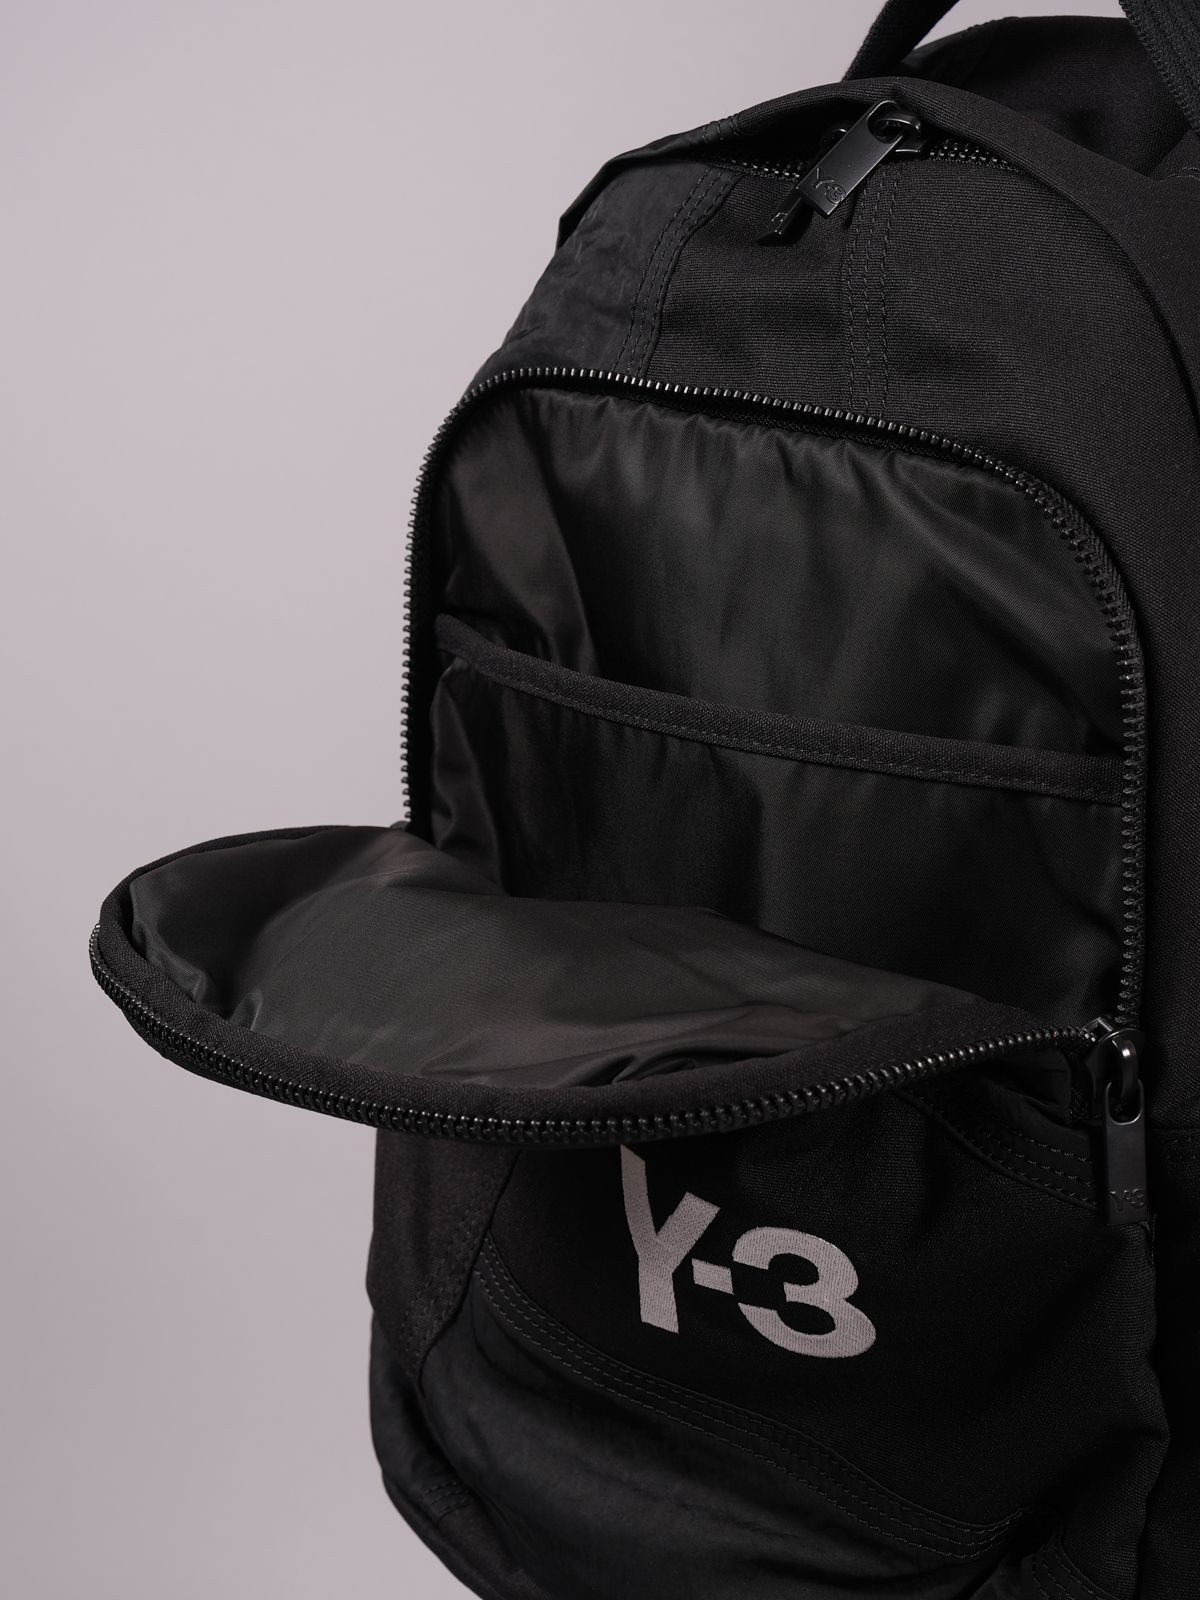 Y-3 - 【ラスト1点】 Y-3 CLASSIC BACKPACK / ワイスリー クラシック 